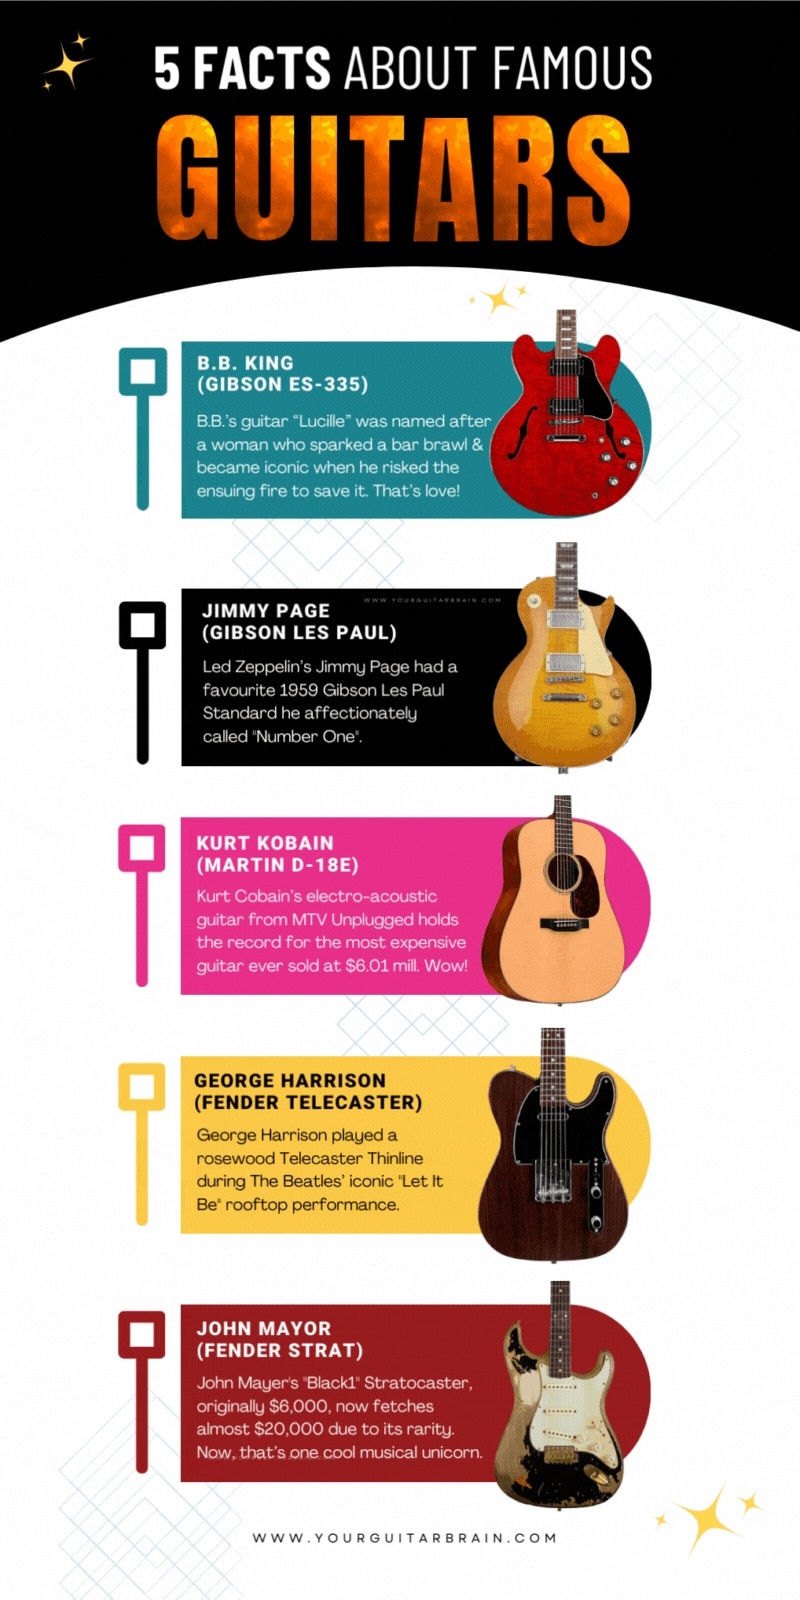 Guitar names graphic with acoustic guitars and expensive electric guitars played by famous guitarists like Jimi Hendrix and Curt Cobain